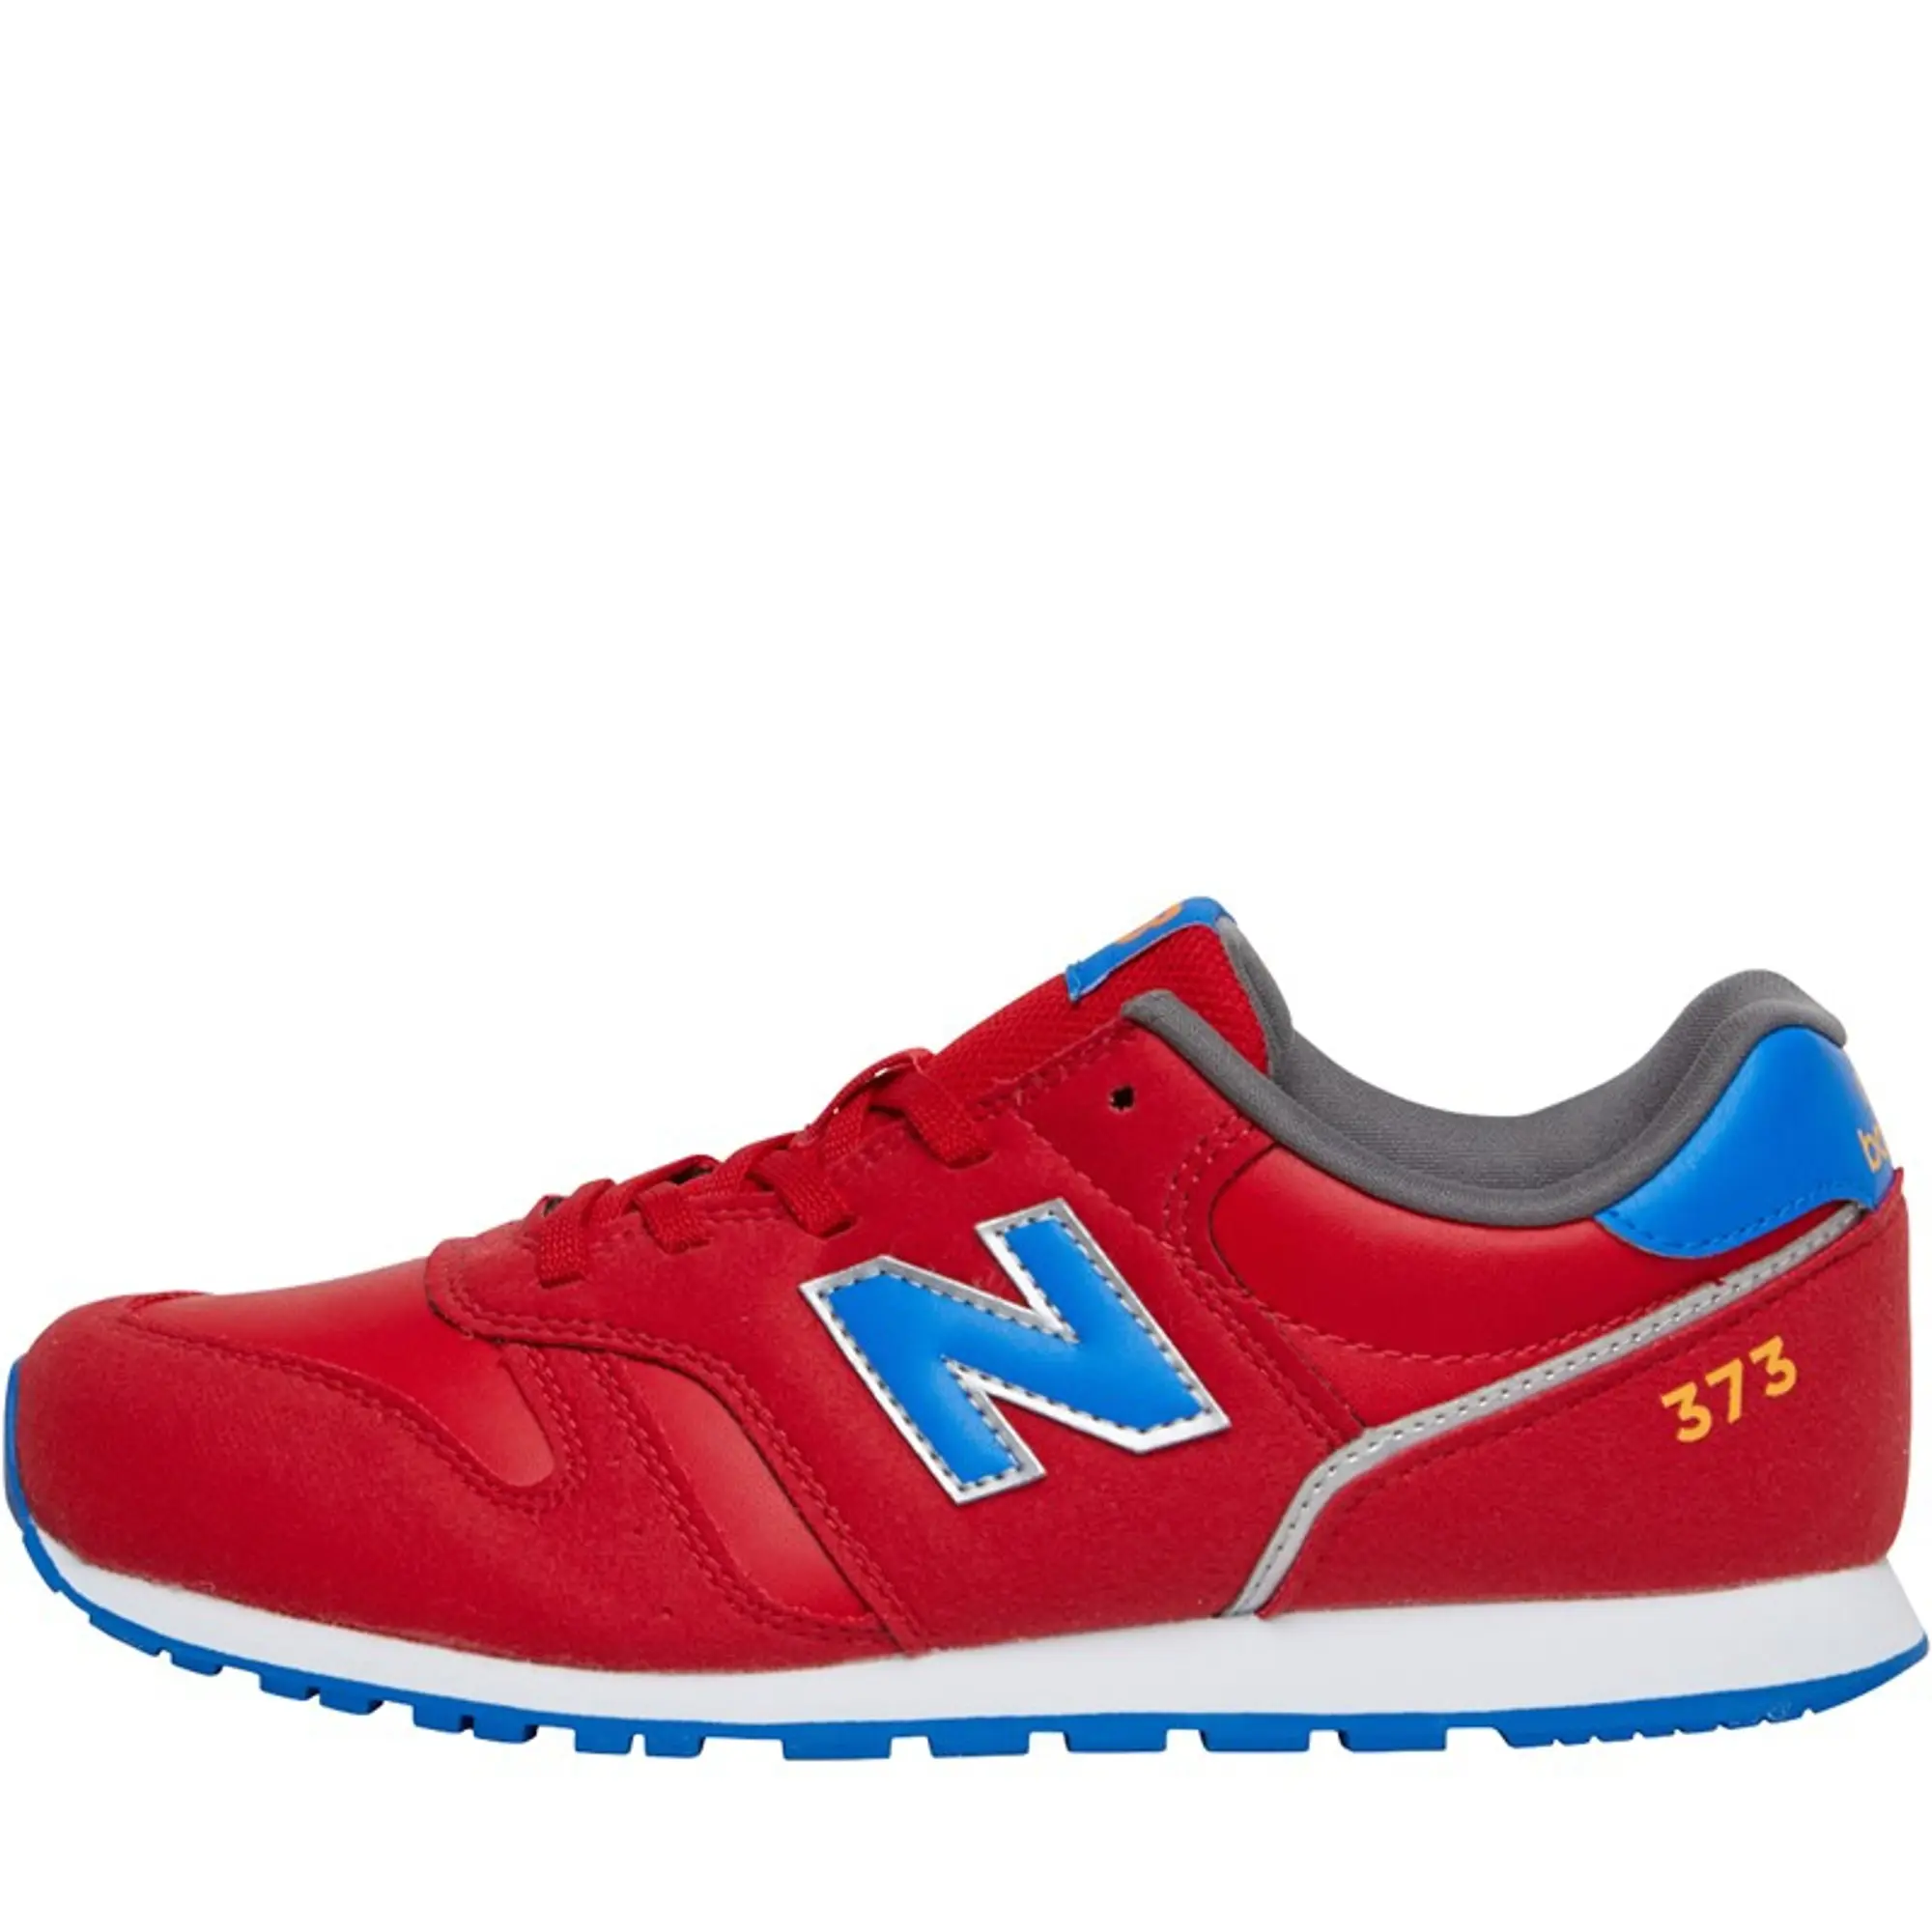 New Balance Kids 373 Trainers Red/Blue